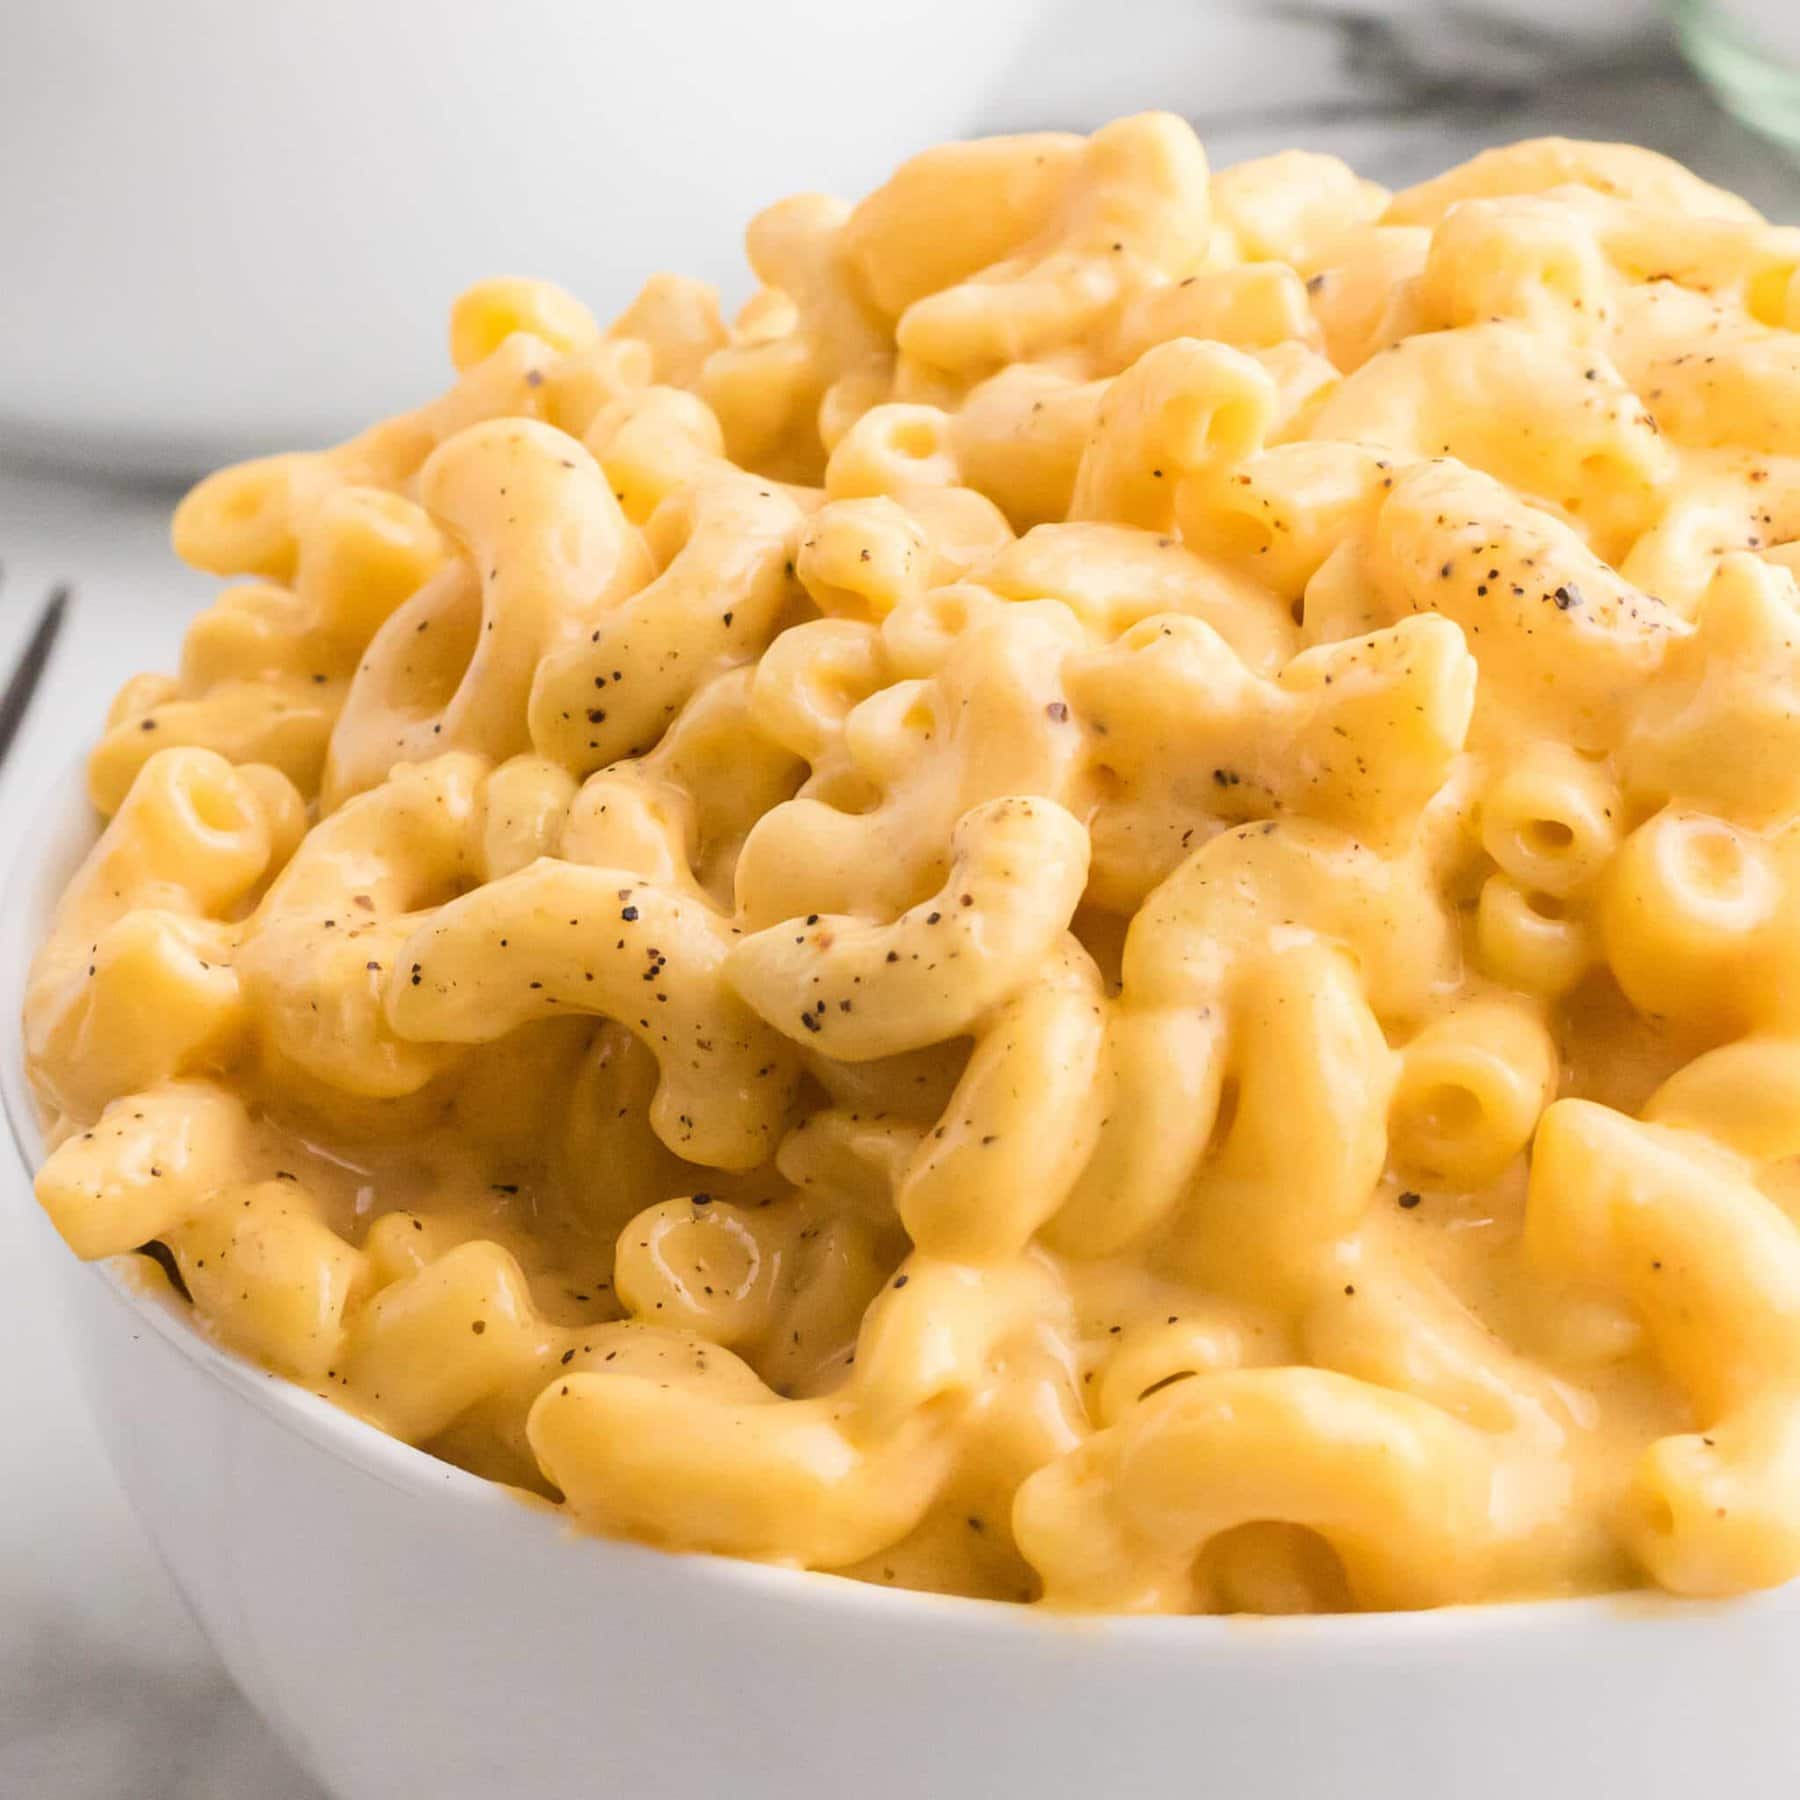 Crock Pot Mac and Cheese (Extra Creamy) - Spend With Pennies